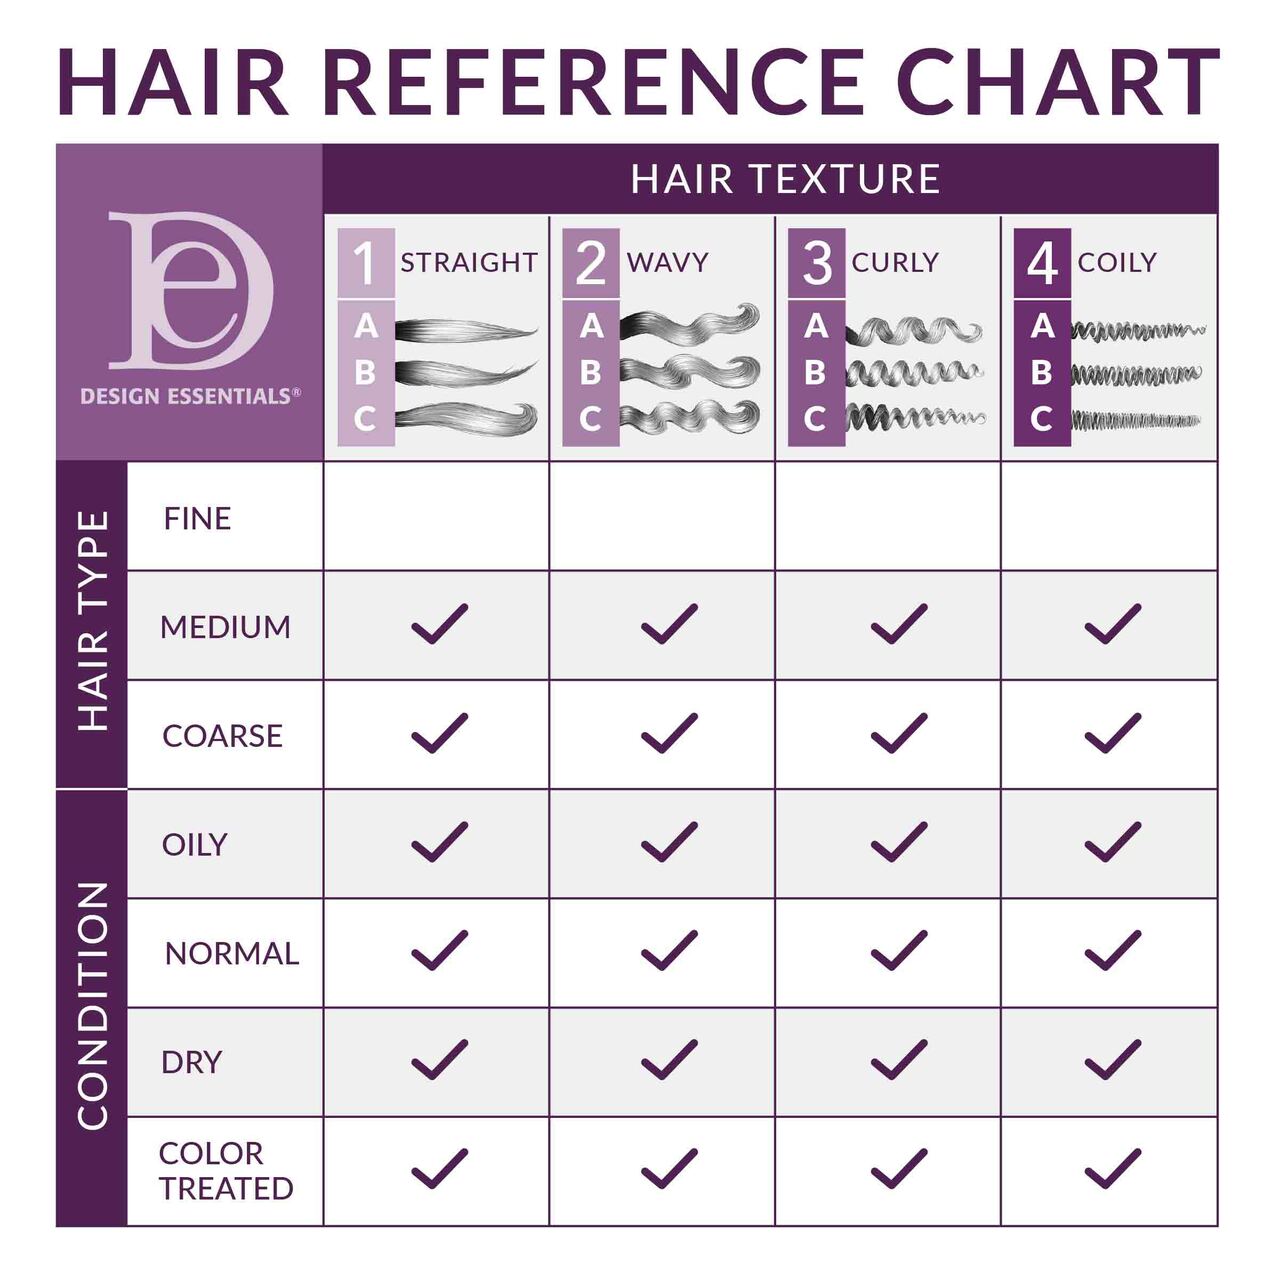 Kukui_Coconut_Hydrating_Leave-In_Conditioner_-_Hair_Reference_Chart__04360.1578628411